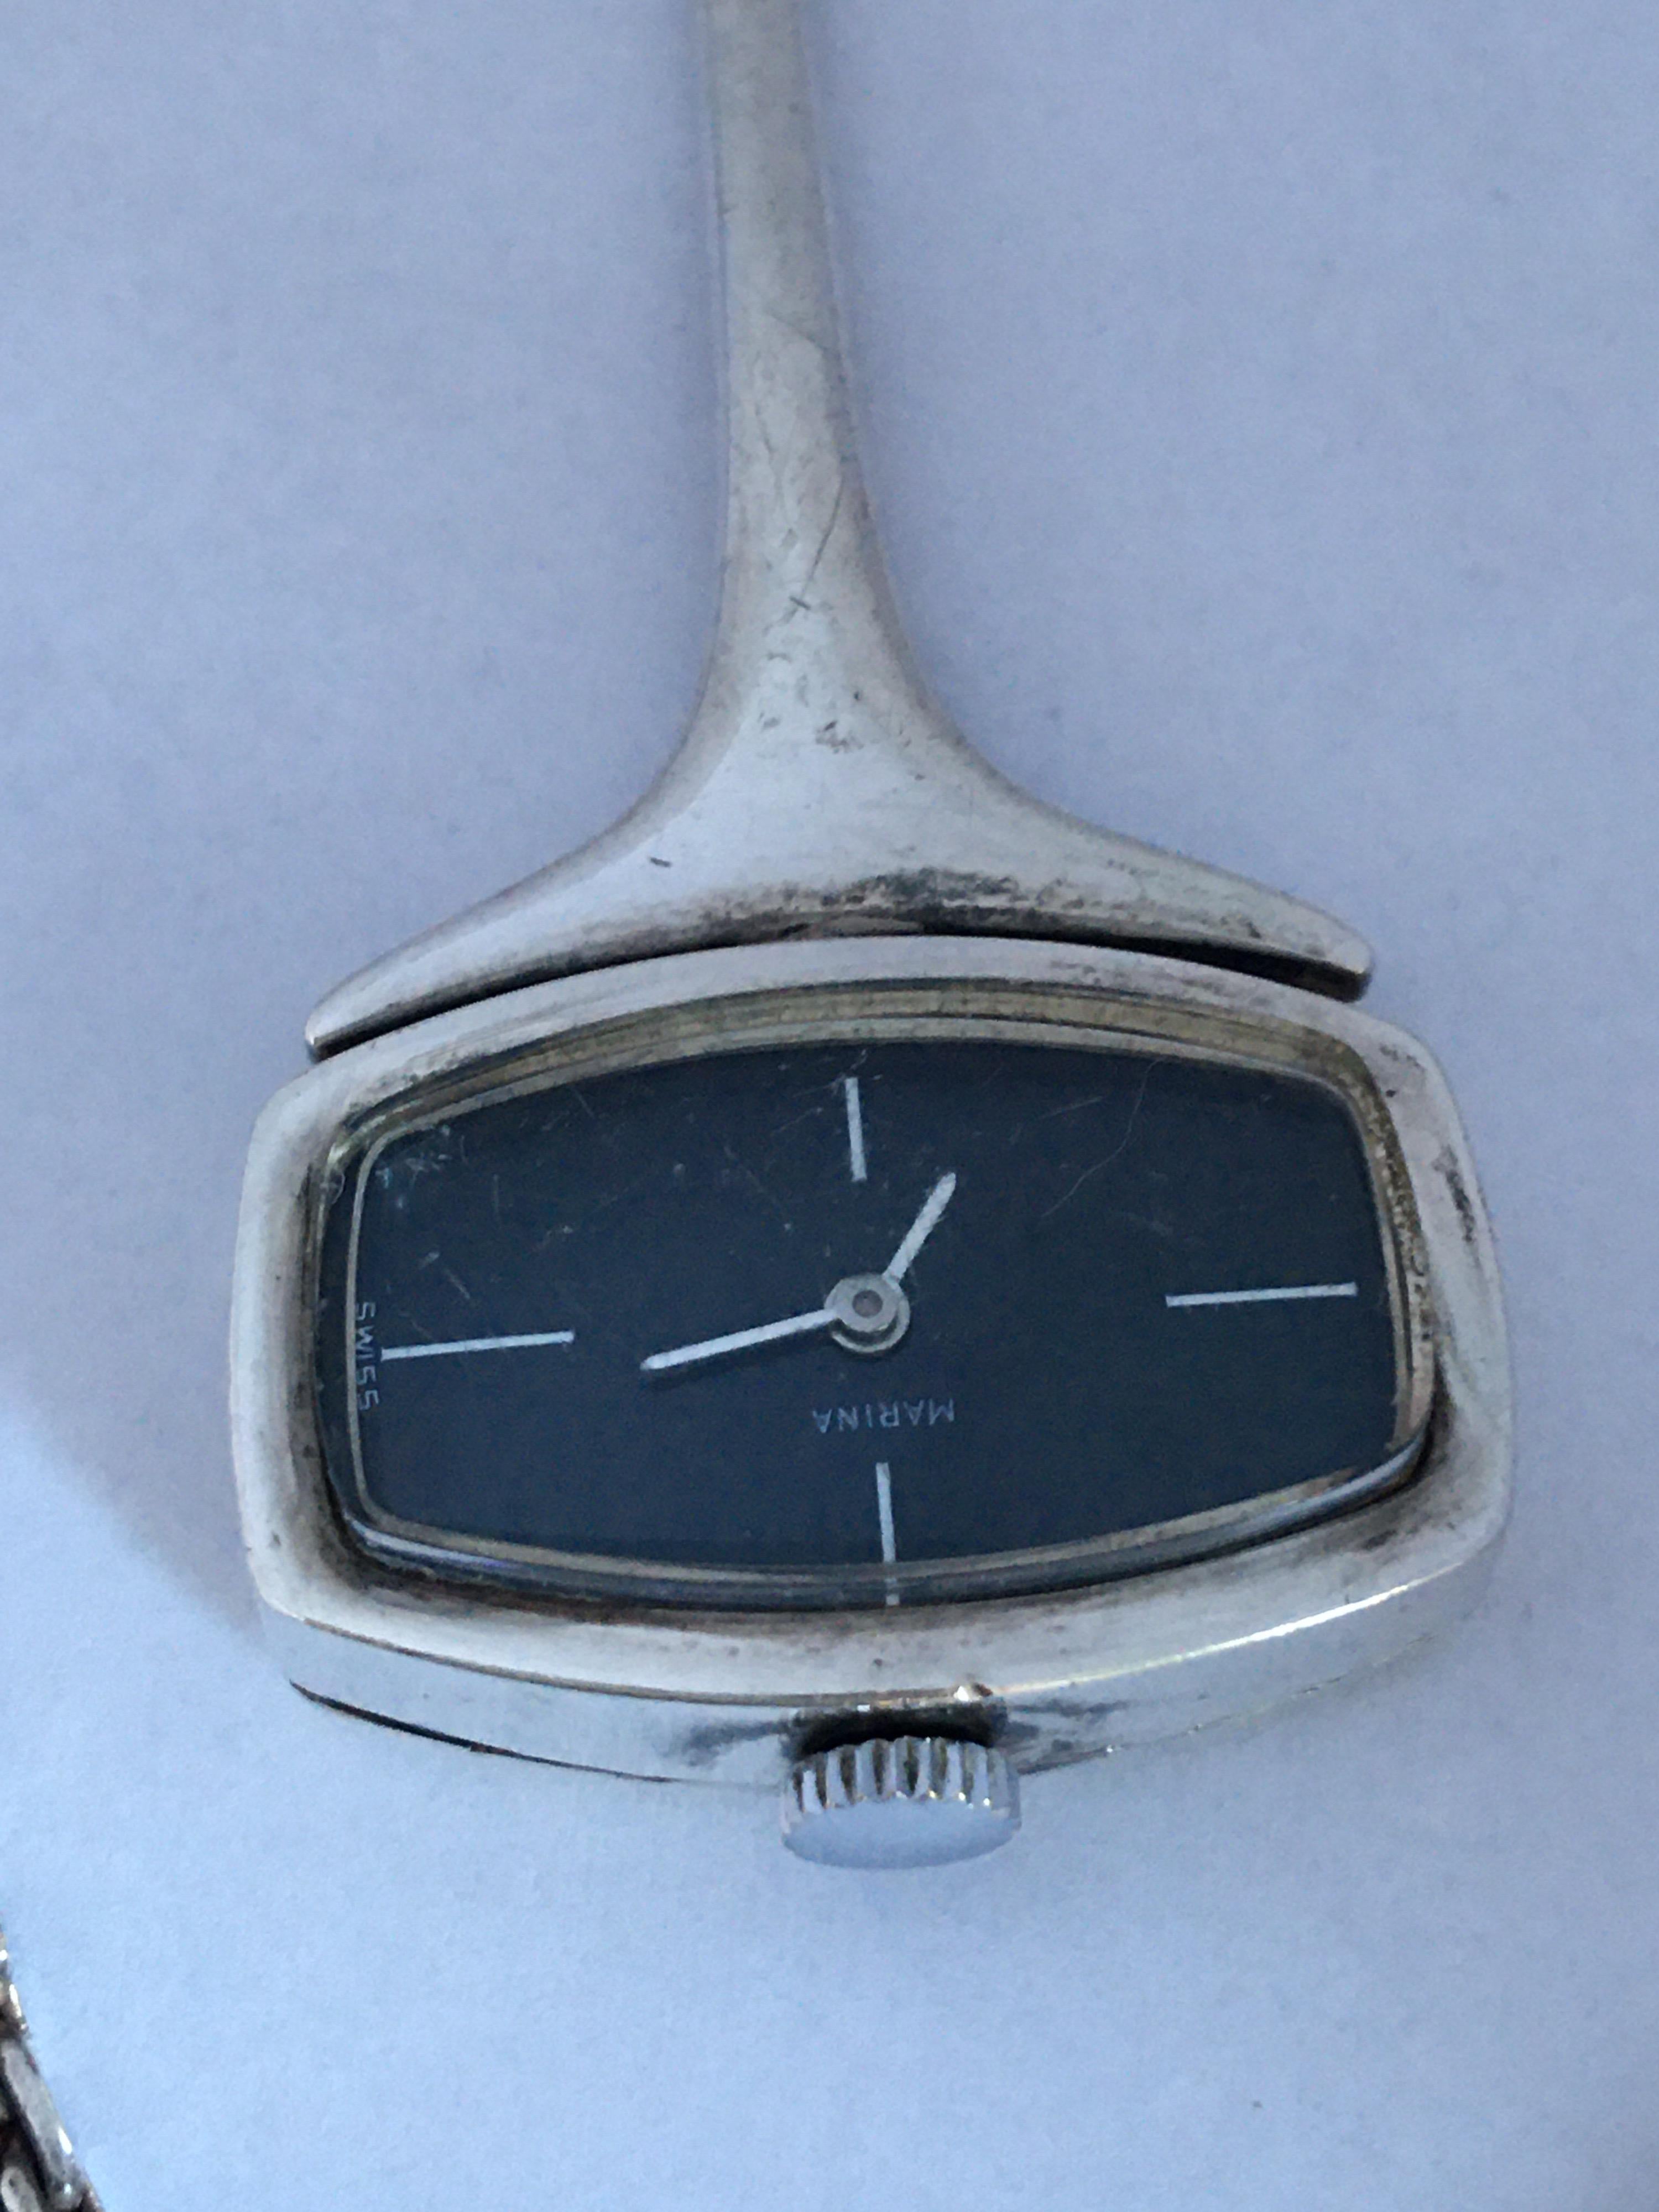 This beautiful pre-owned vintage mechanical pendant watch is in good working condition and it is ticking well. 

There are some visible signs of ageing and wear with tiny scratches on the glass and the watch case. It comes with a 28 inches length